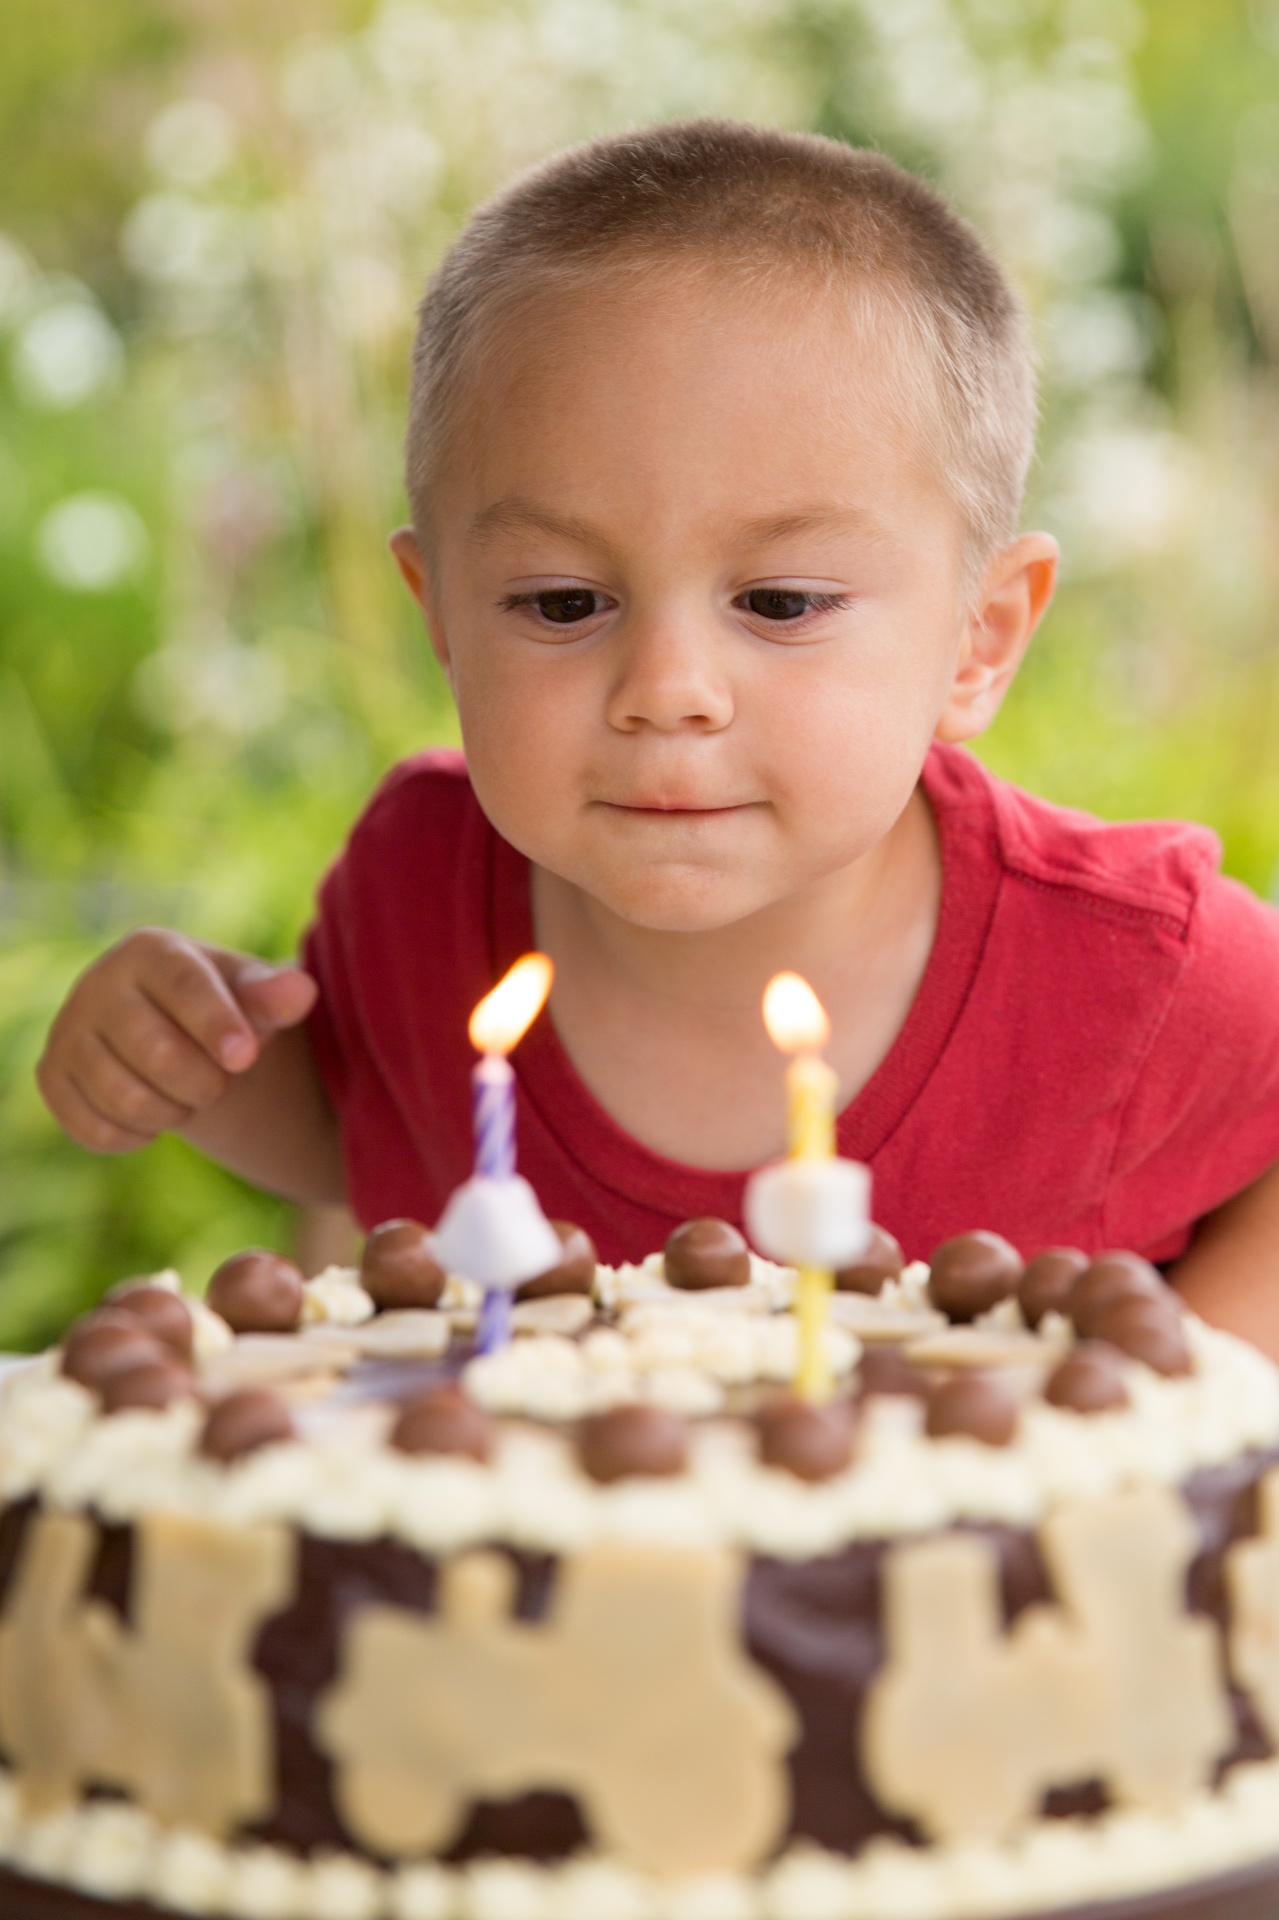 Boy Blowing Out Candles